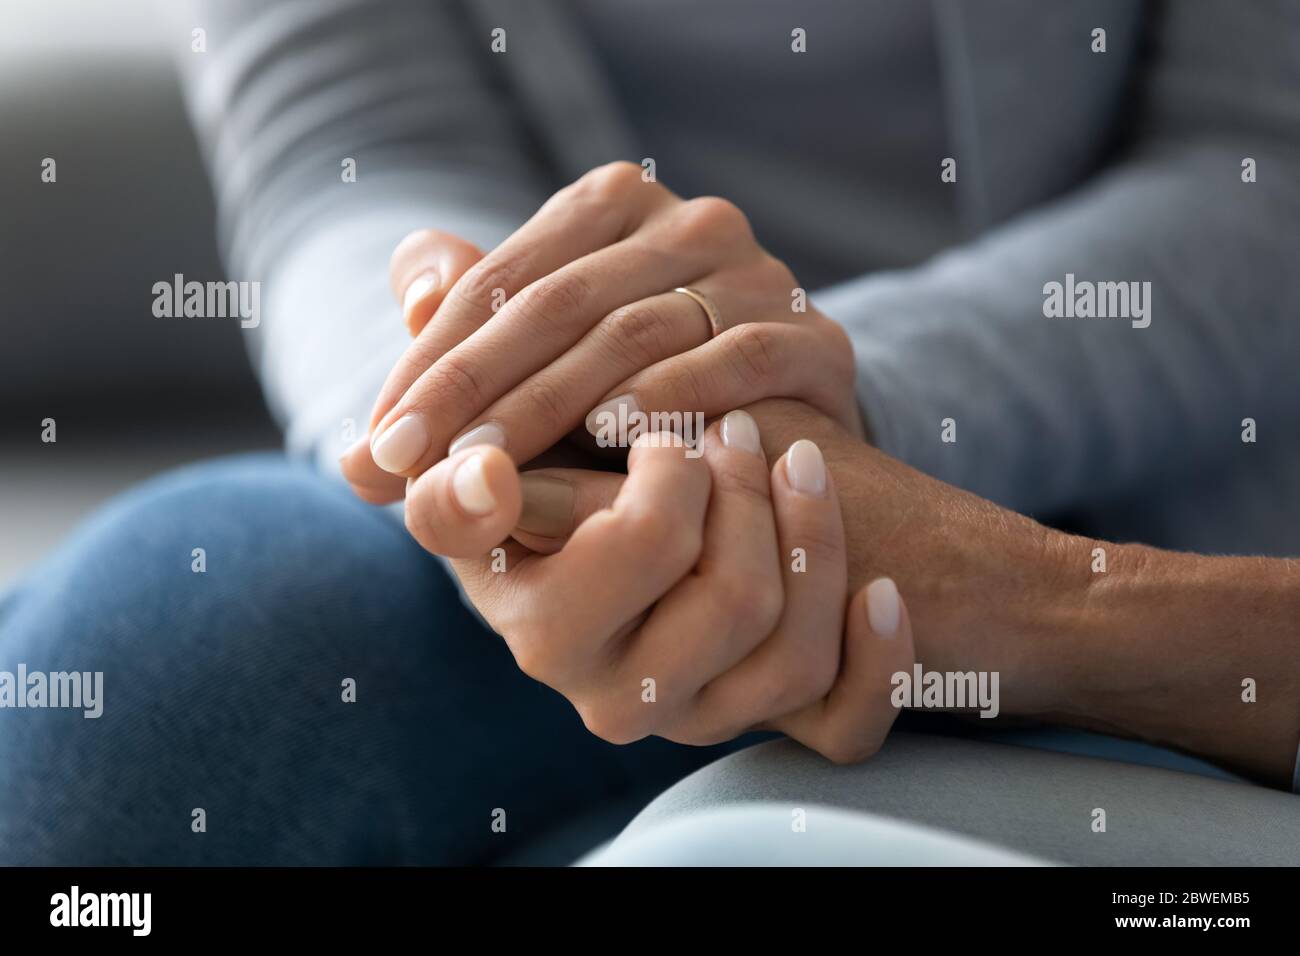 Closeup caring adult daughter holding mothers hand provides psychological support Stock Photo